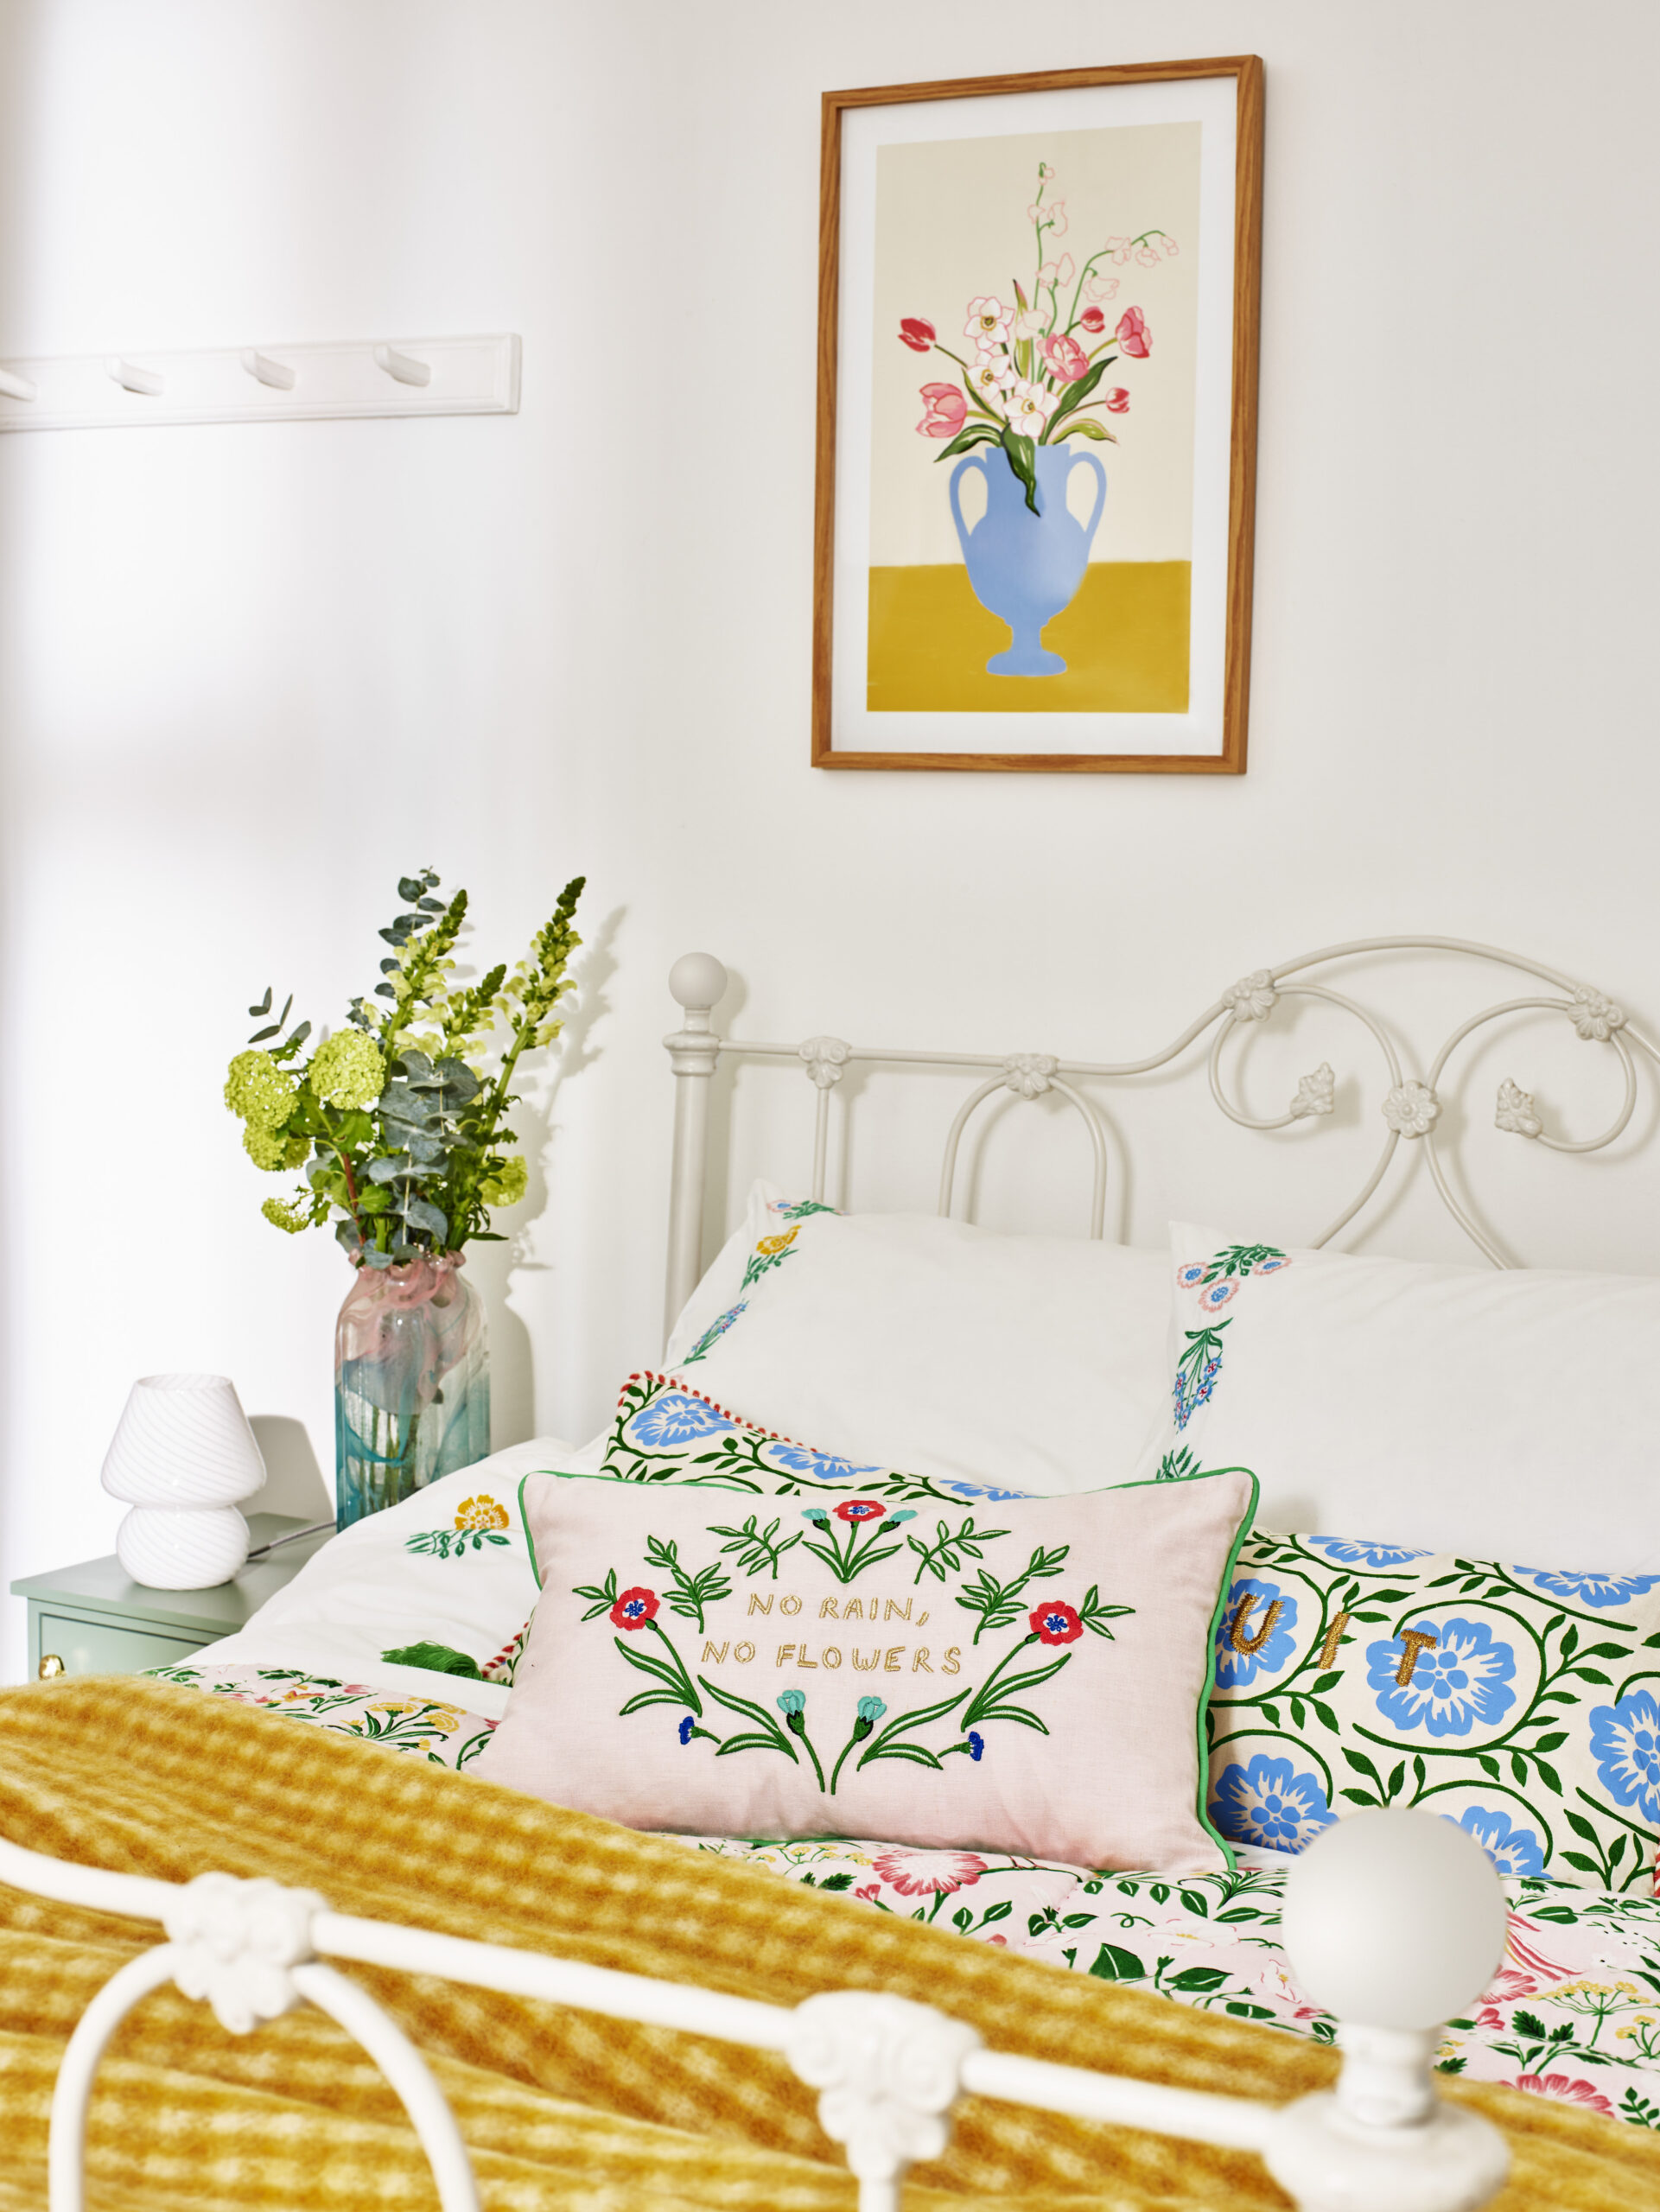 Whether for a special occasion or just because you love blooms, flowers are an easy way to add colour, scent and style into your space. Check out these 9 flower styling ideas are amongst the prettiest you'll have seen by Interior Stylist Maxine Brady. Flowers on a bedside table with floral bedding and cushions